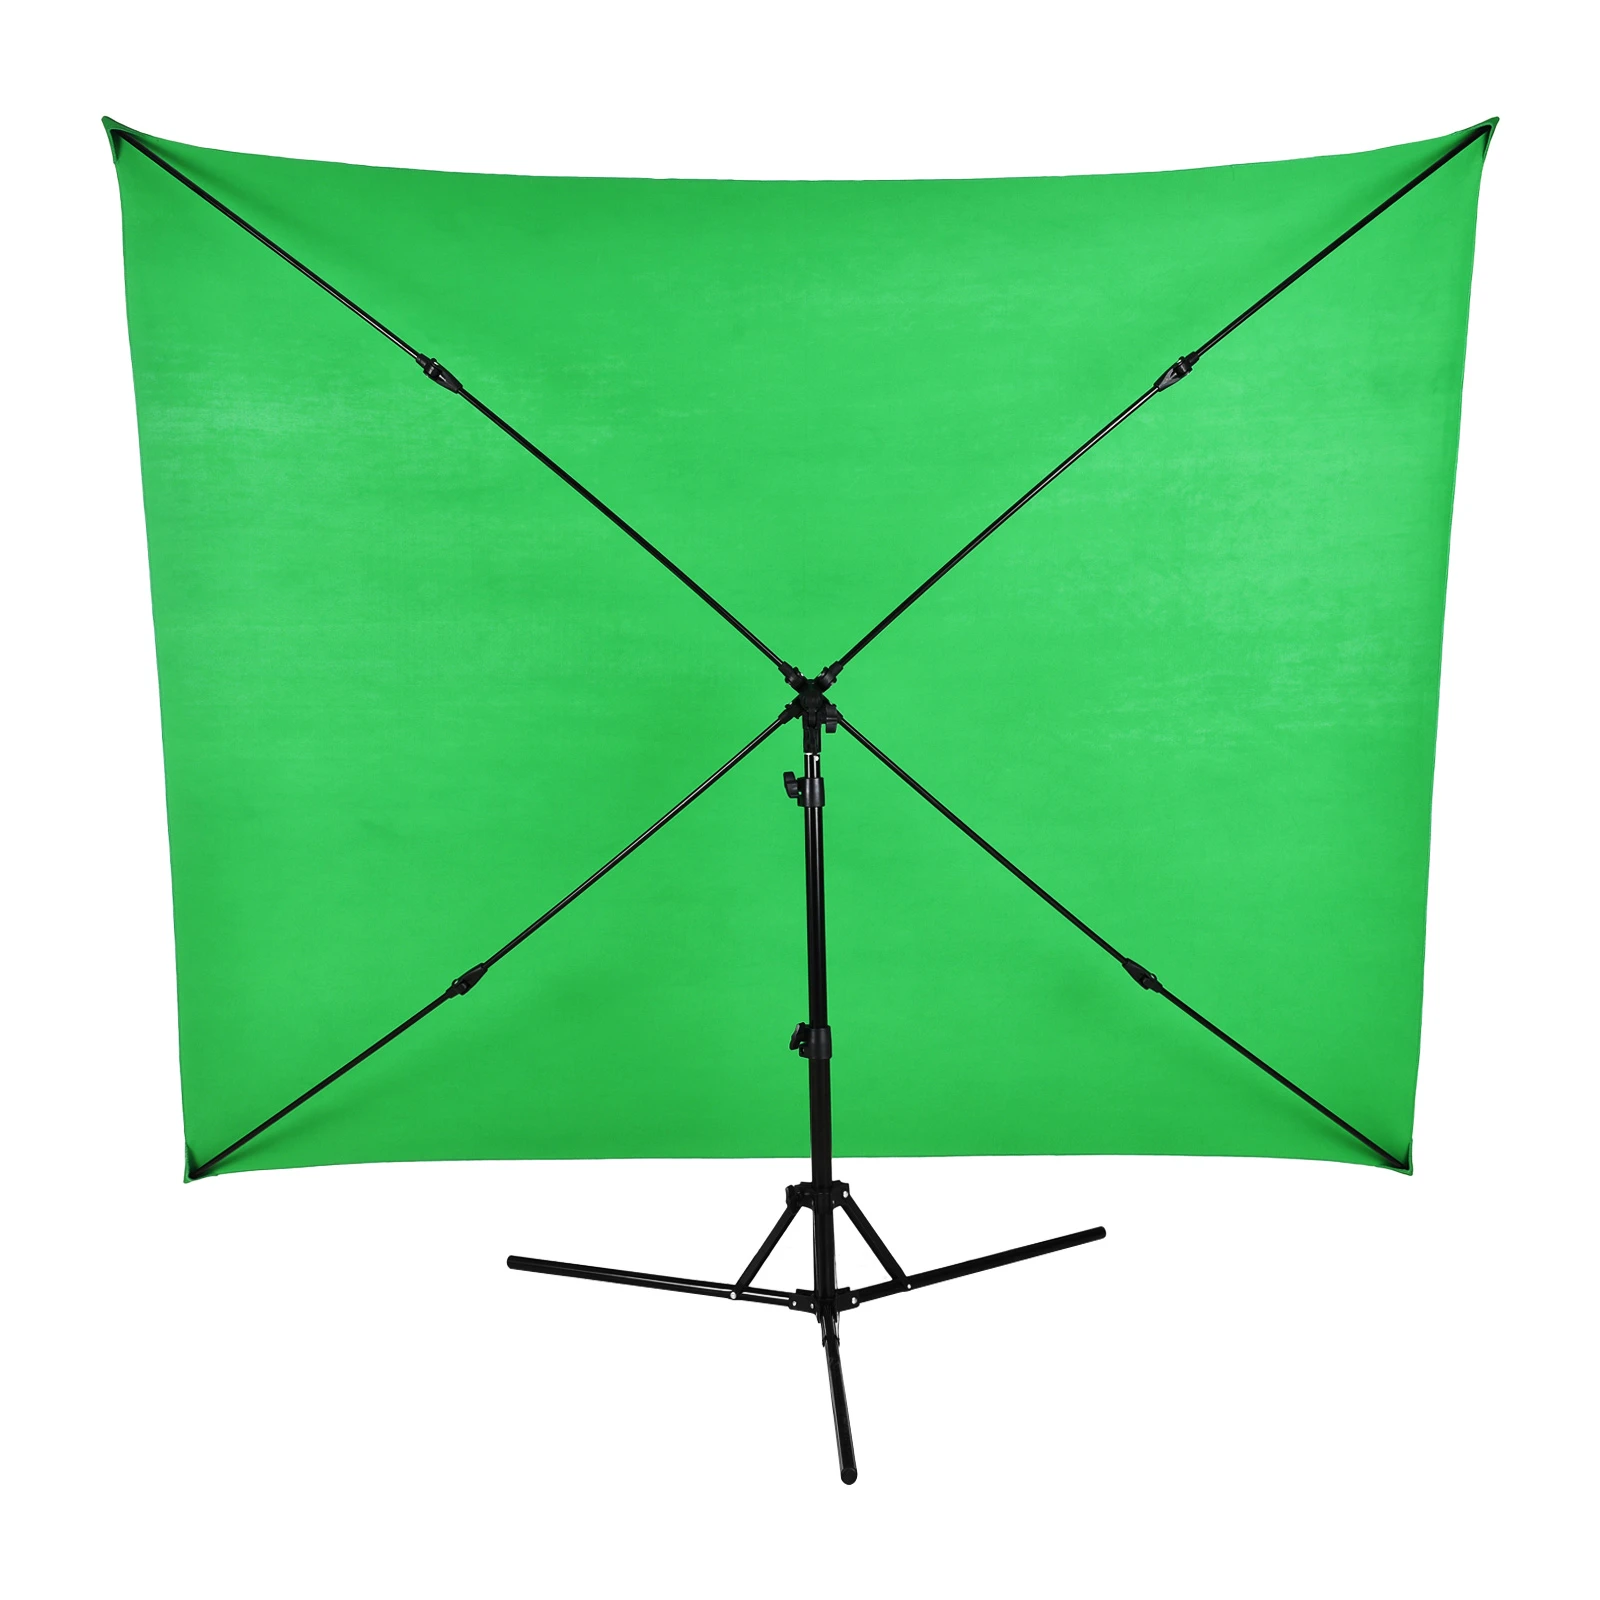 2x1.5m/6.5x4.9ft Green Screen Backdrop Photography Background ...